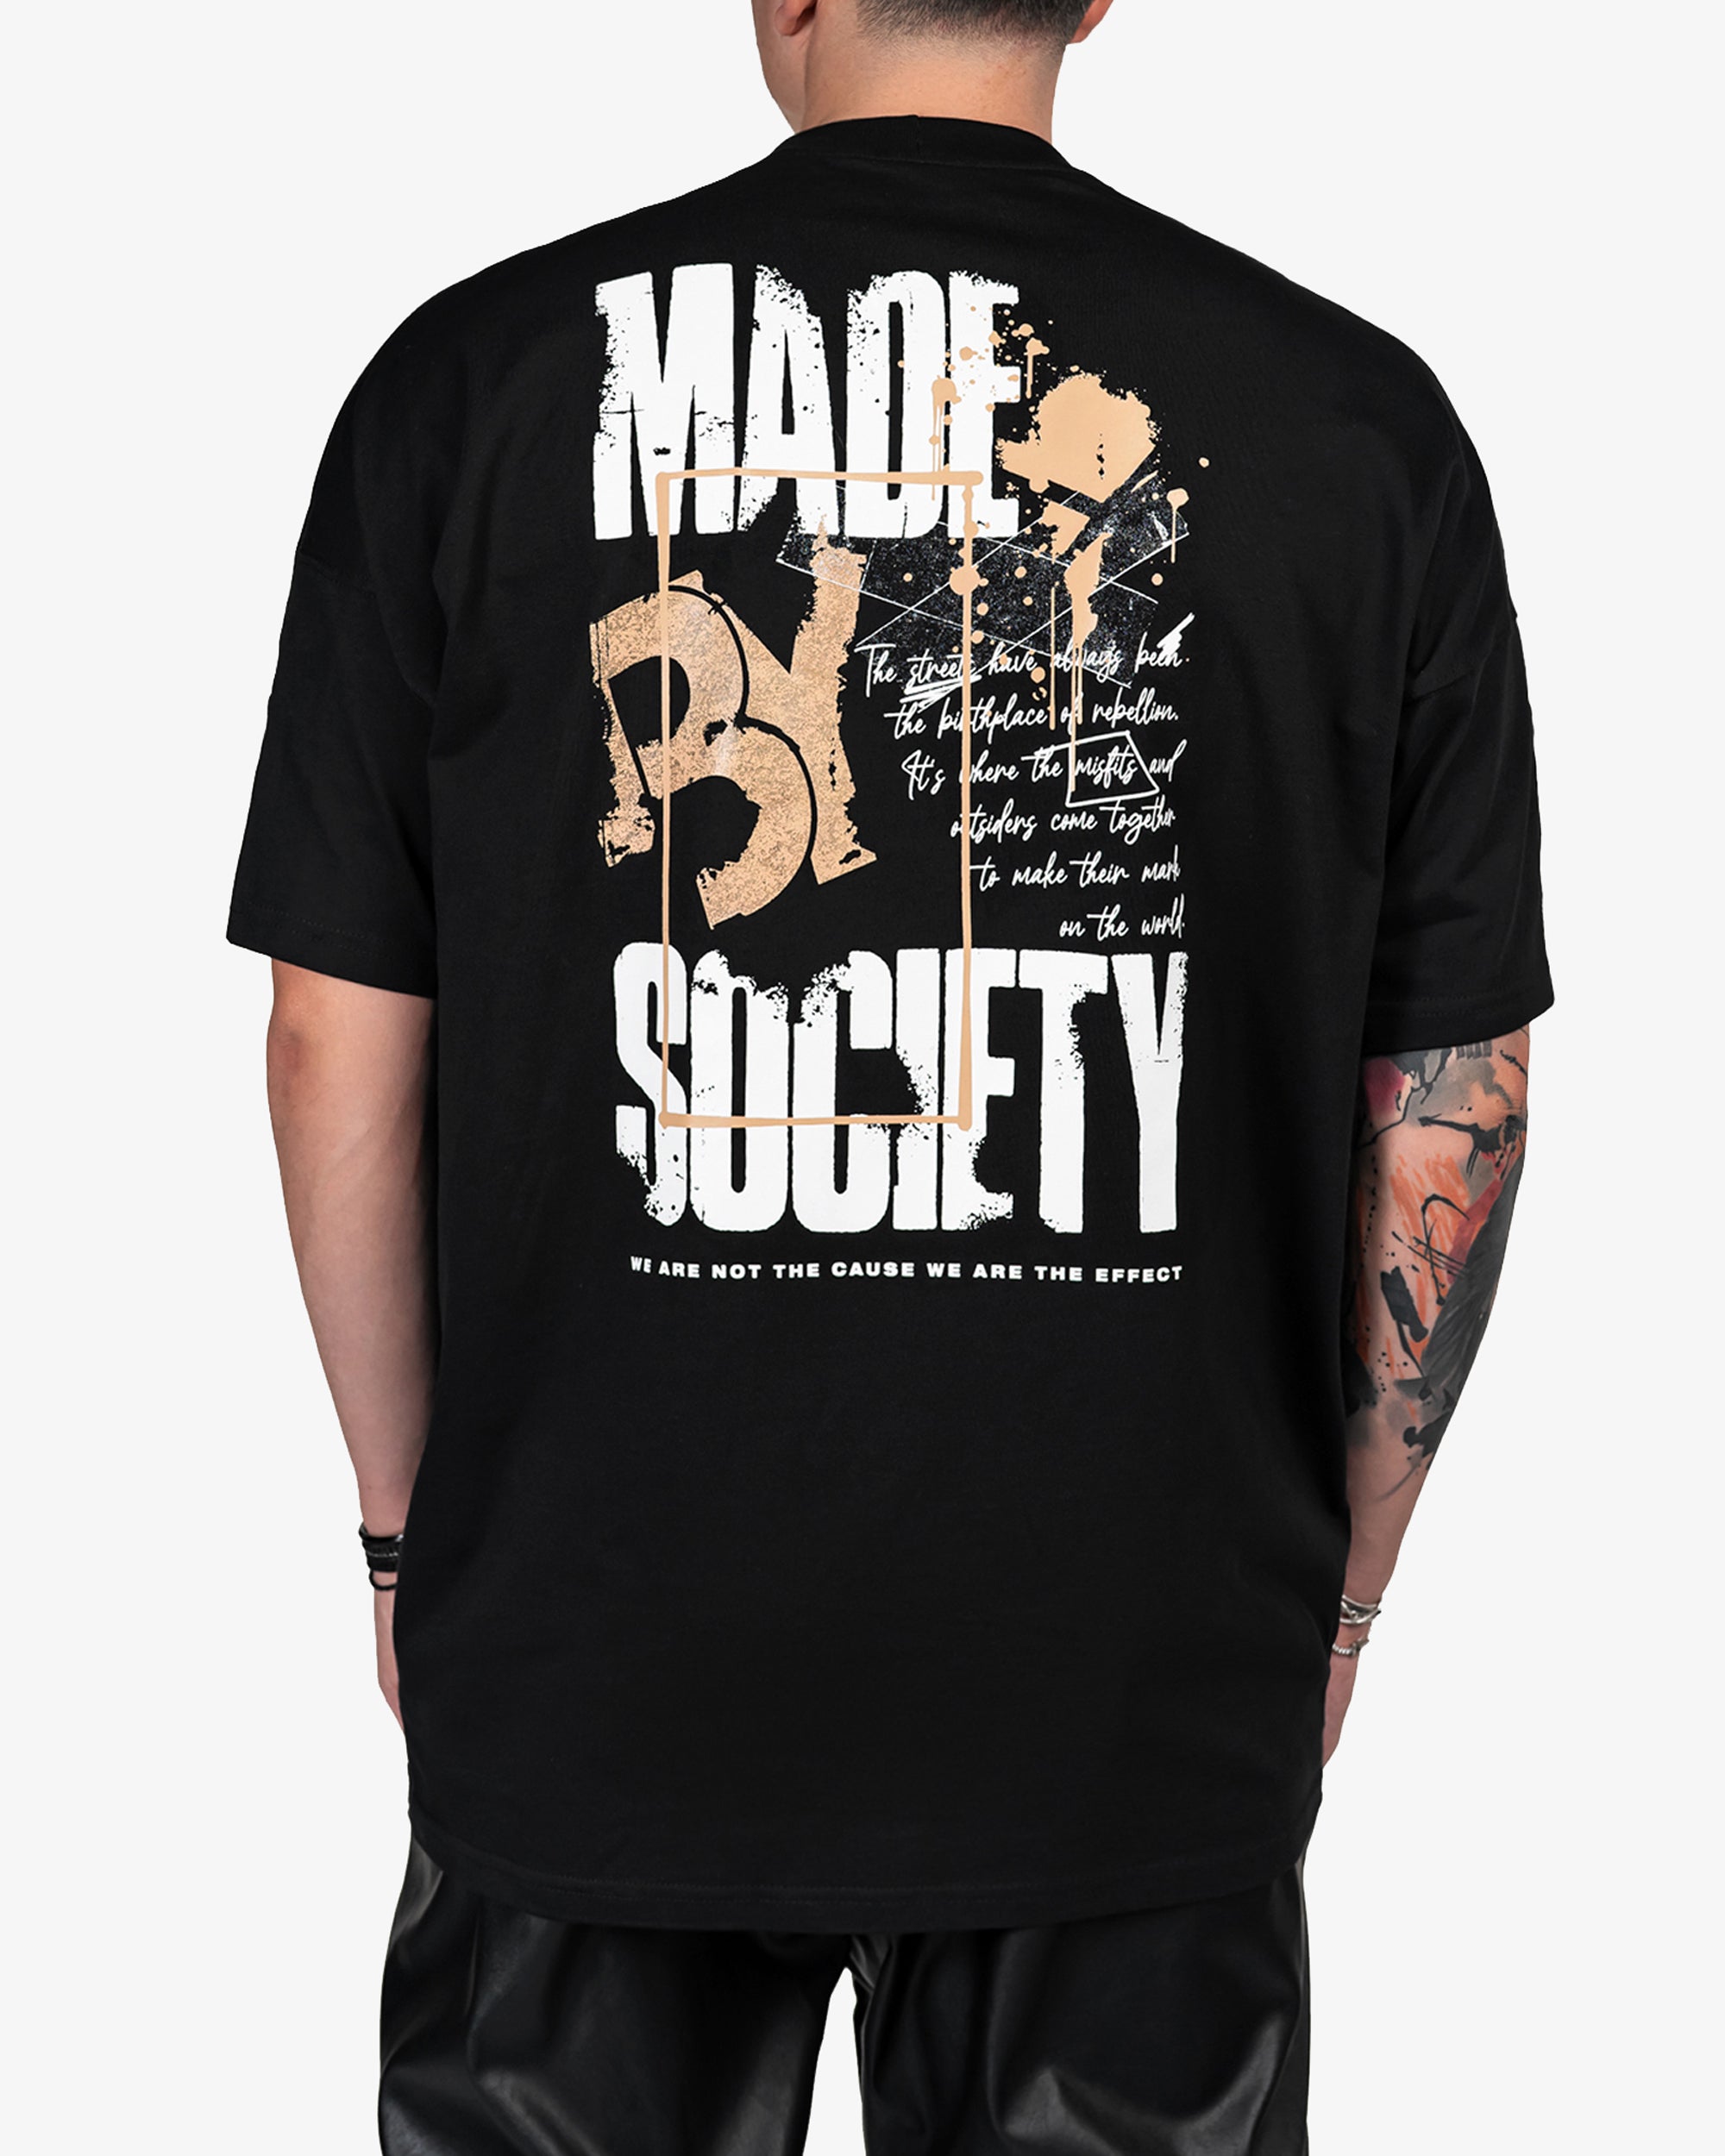 Made by society t-shirt - T14943